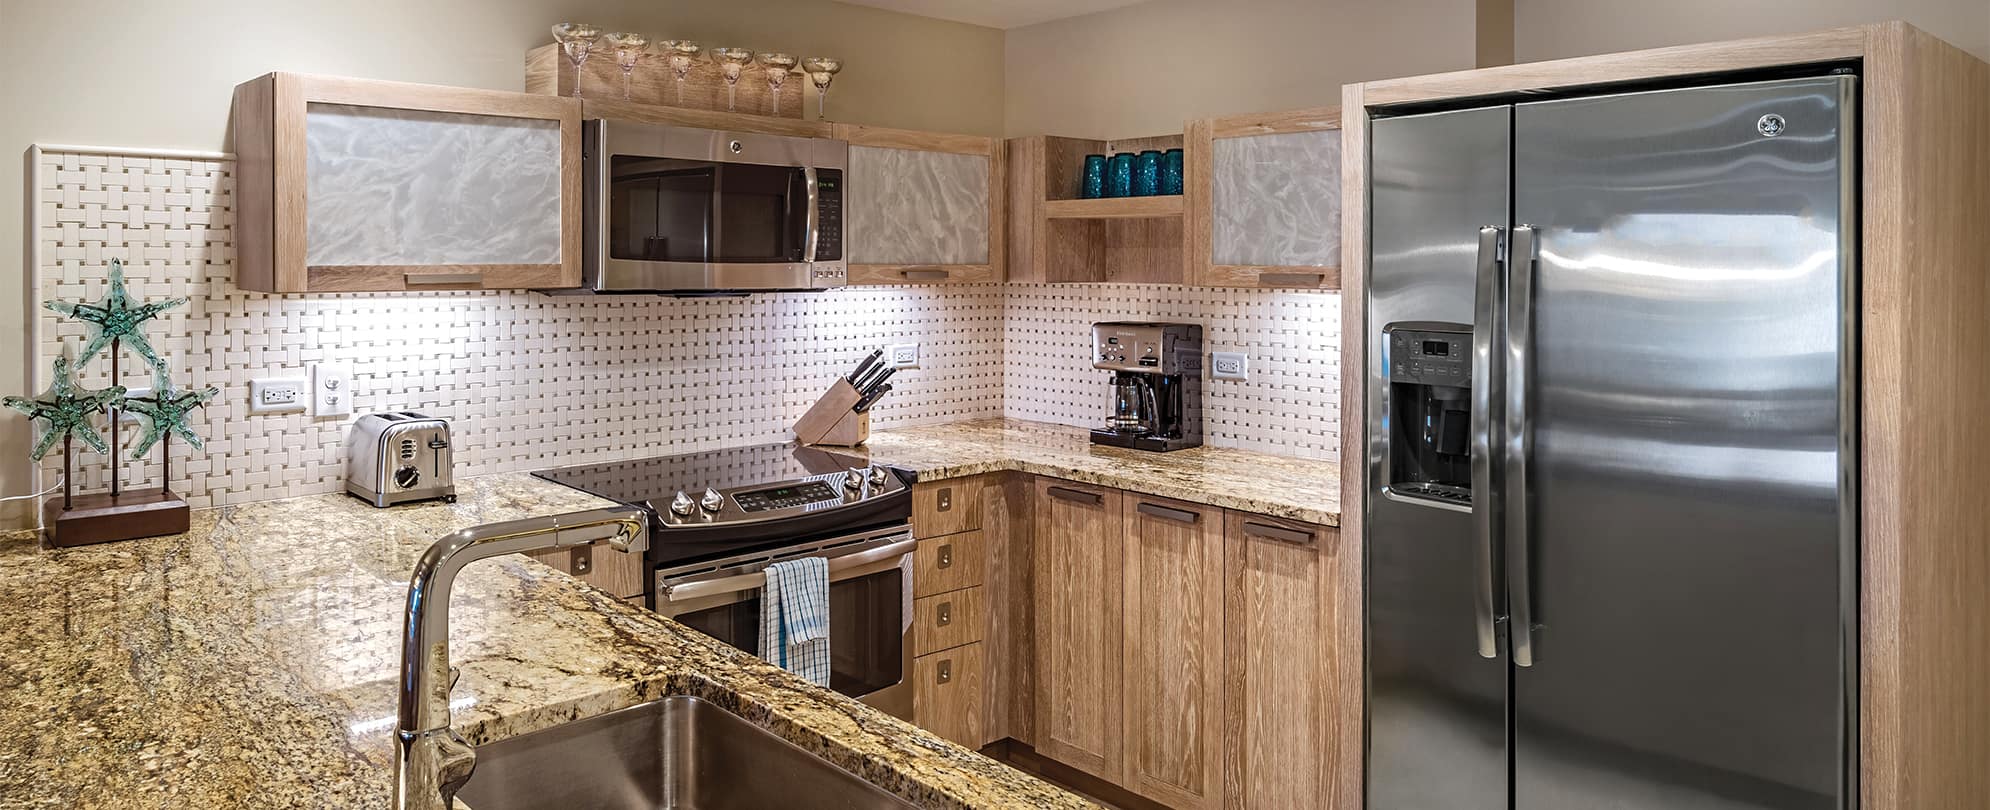 Refrigerator, sink, and stove in a Presidential Reserve suite kitchen at Margaritaville Vacation Club by Wyndham - St. Thomas.